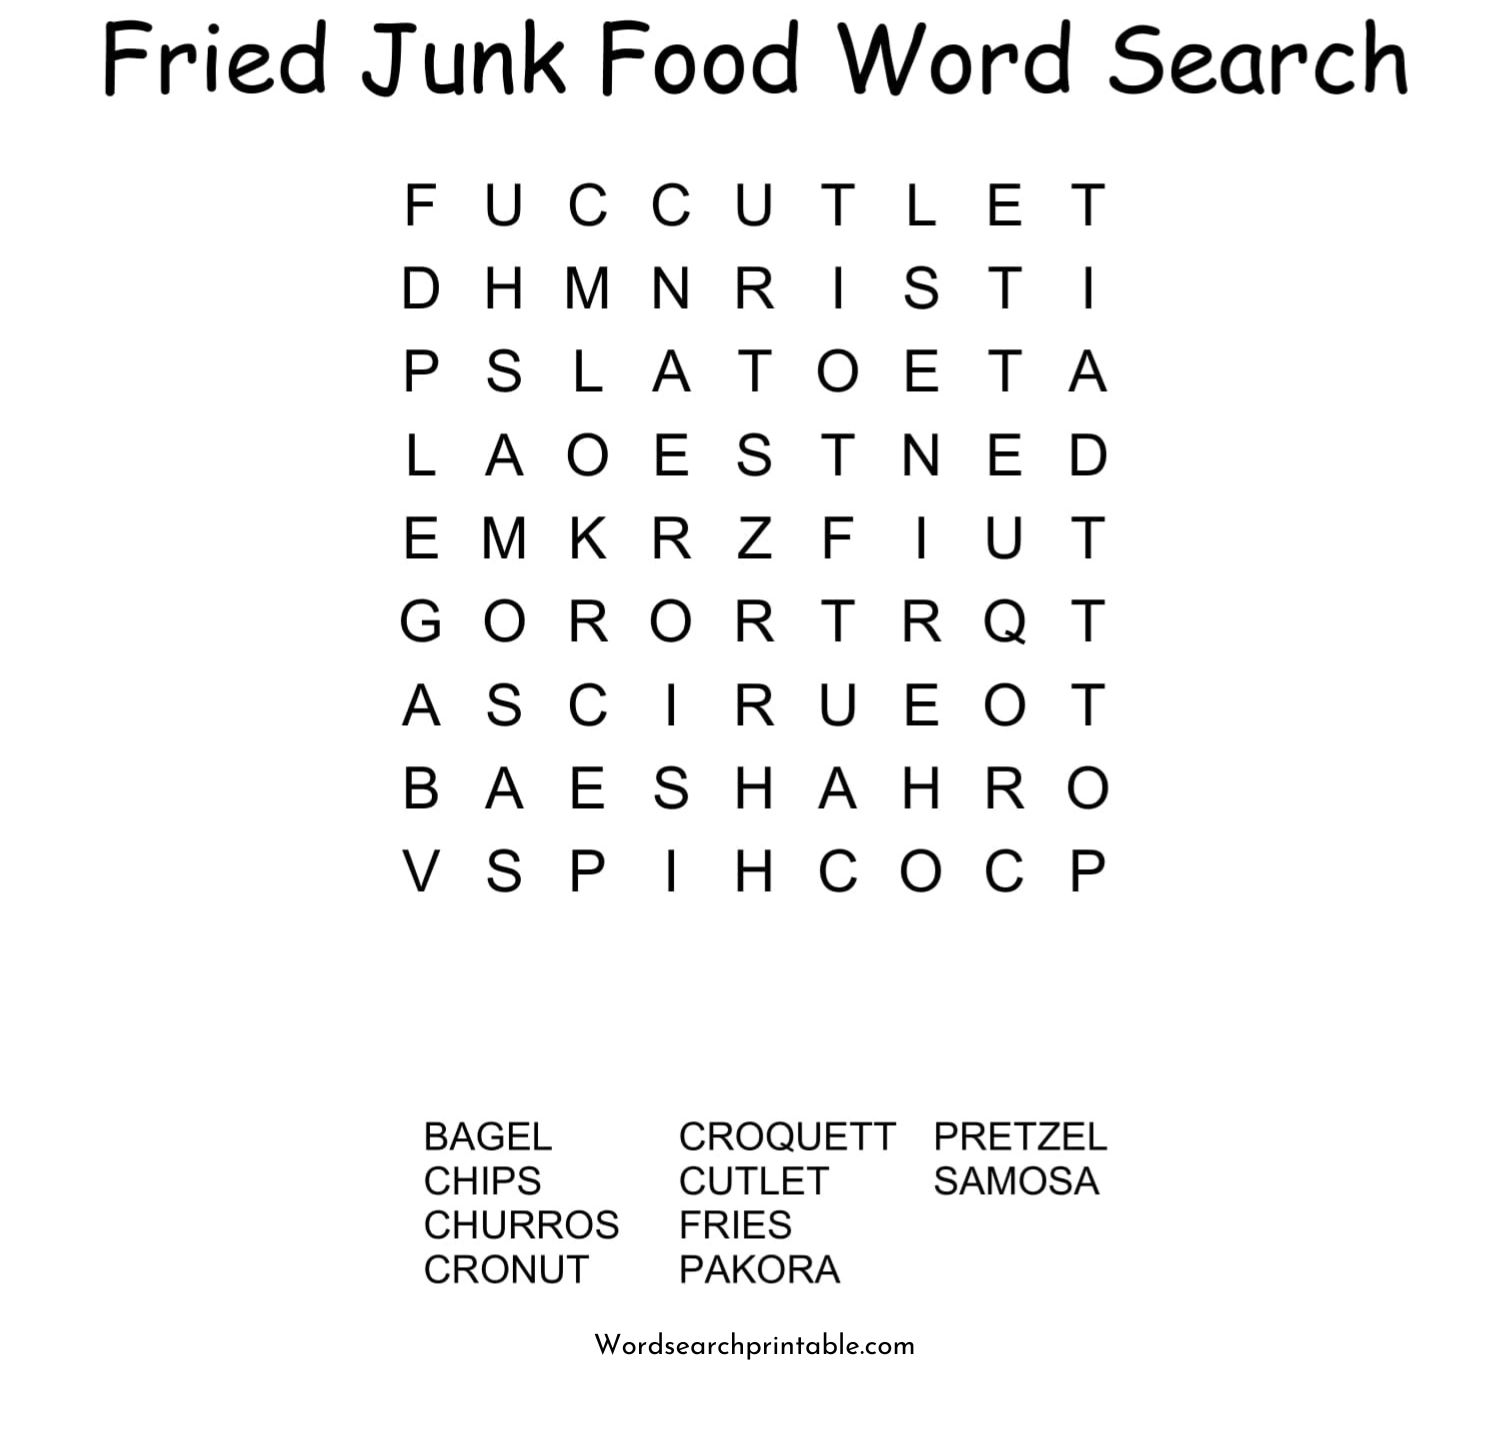 fried junk food word search puzzle